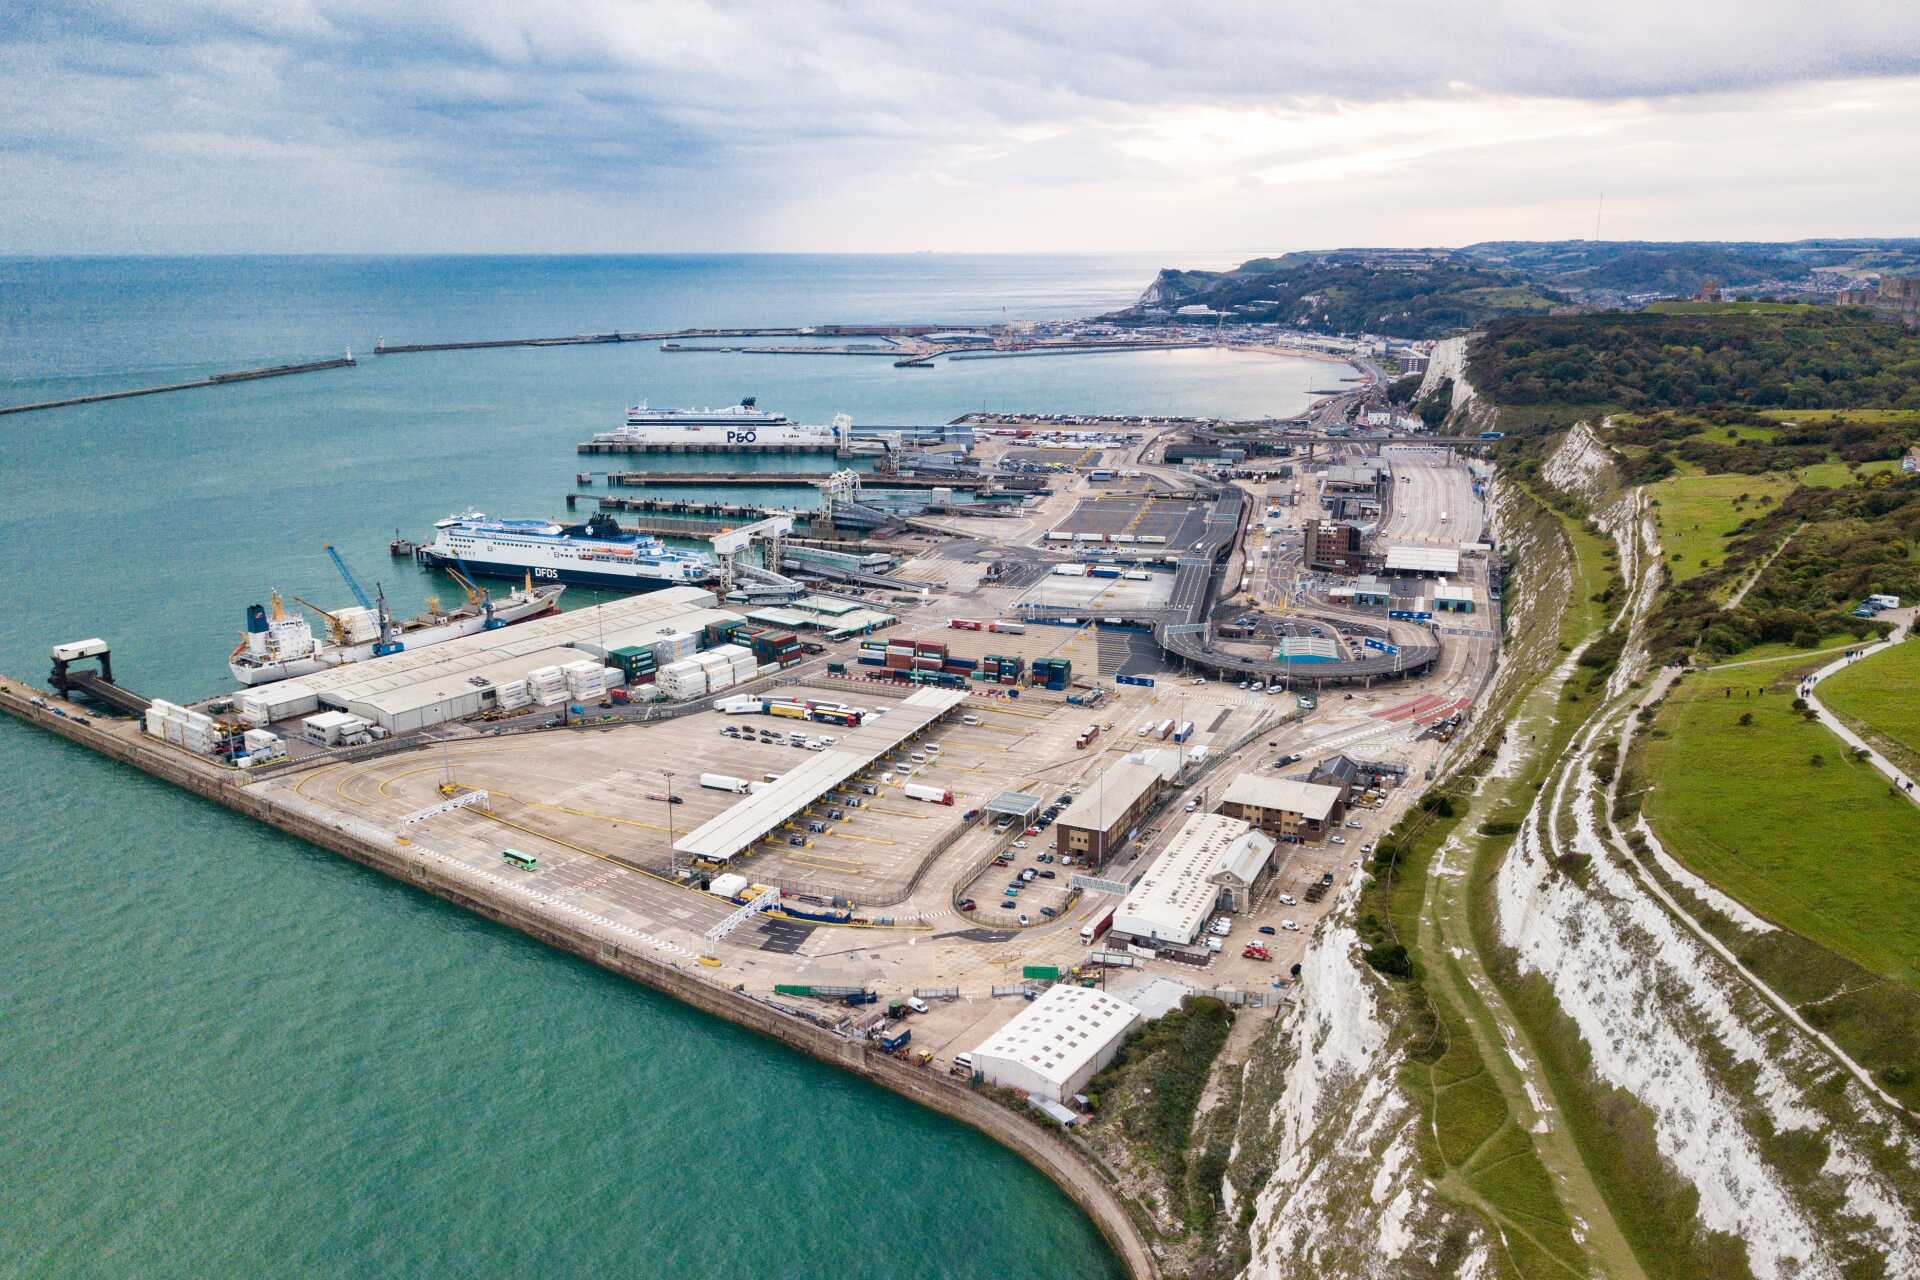 Birds-eye view of the Port of Dover